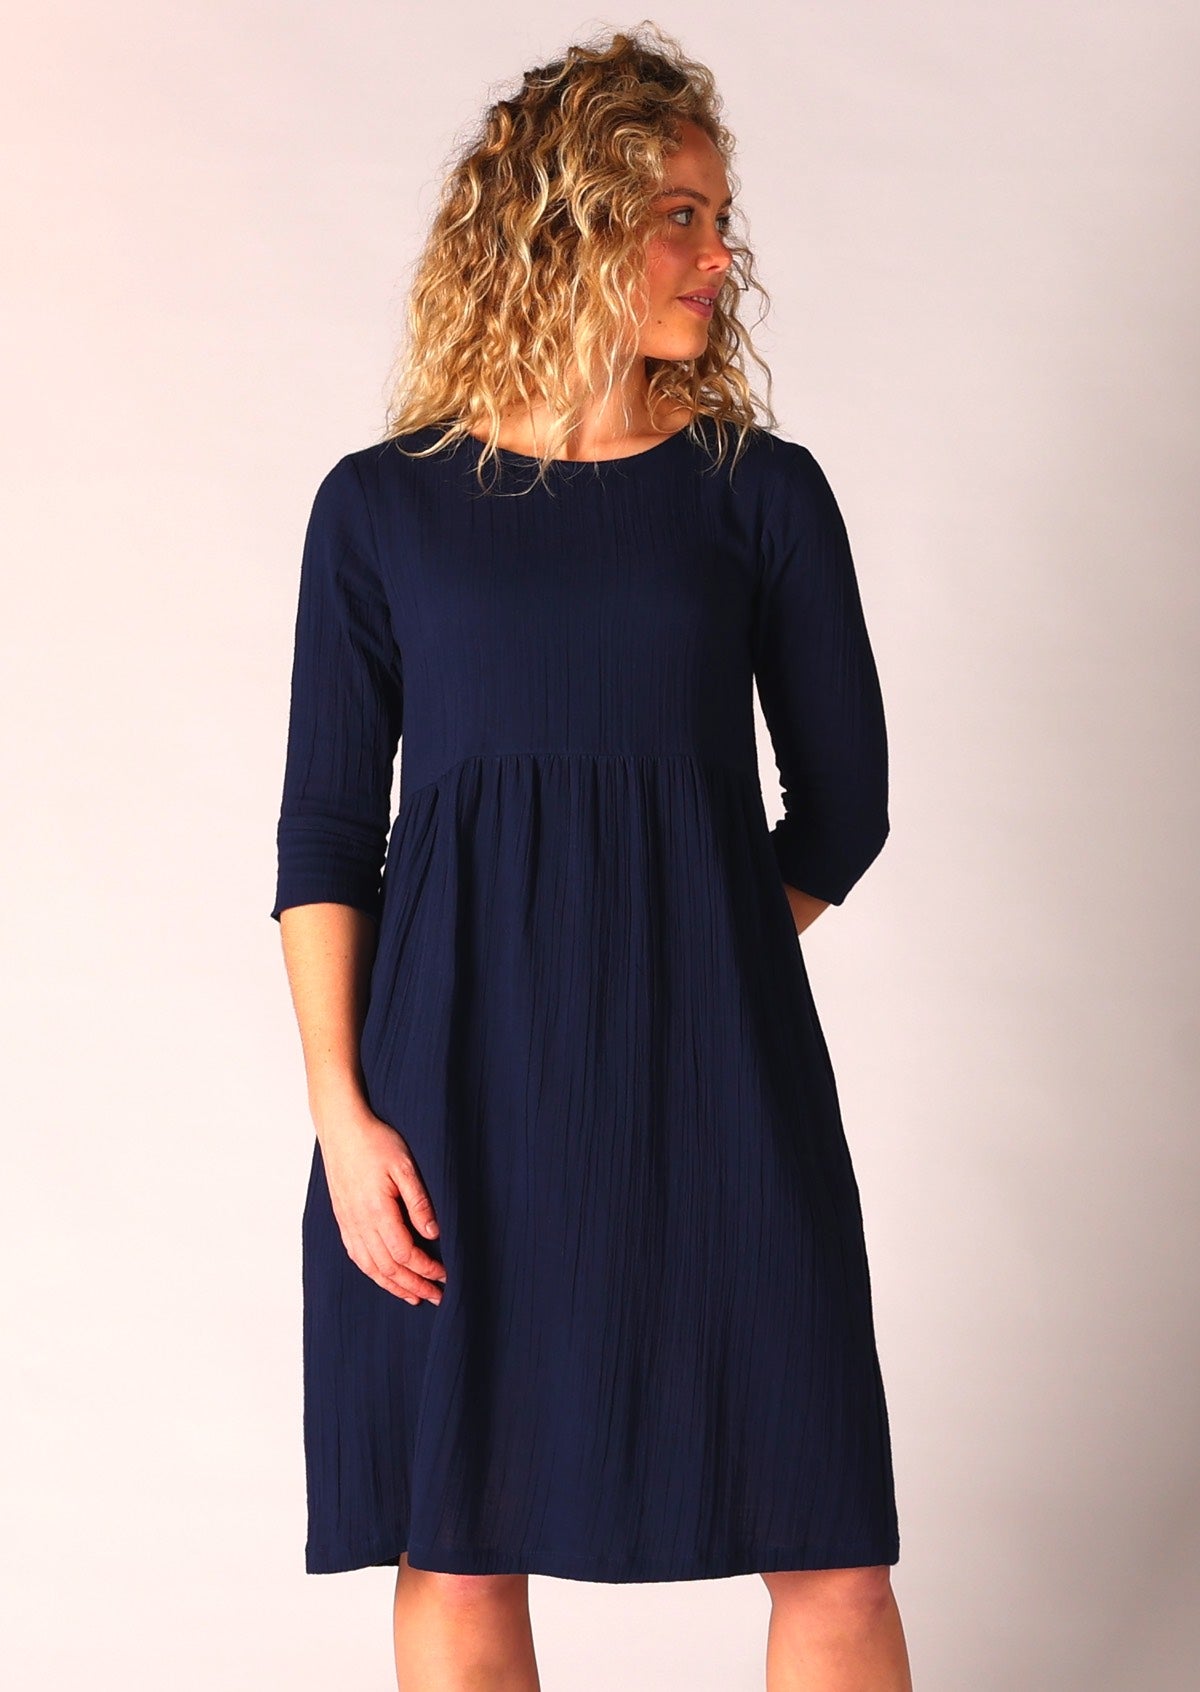 Over knee relaxed fit cotton gauze dress with round neckline and pockets